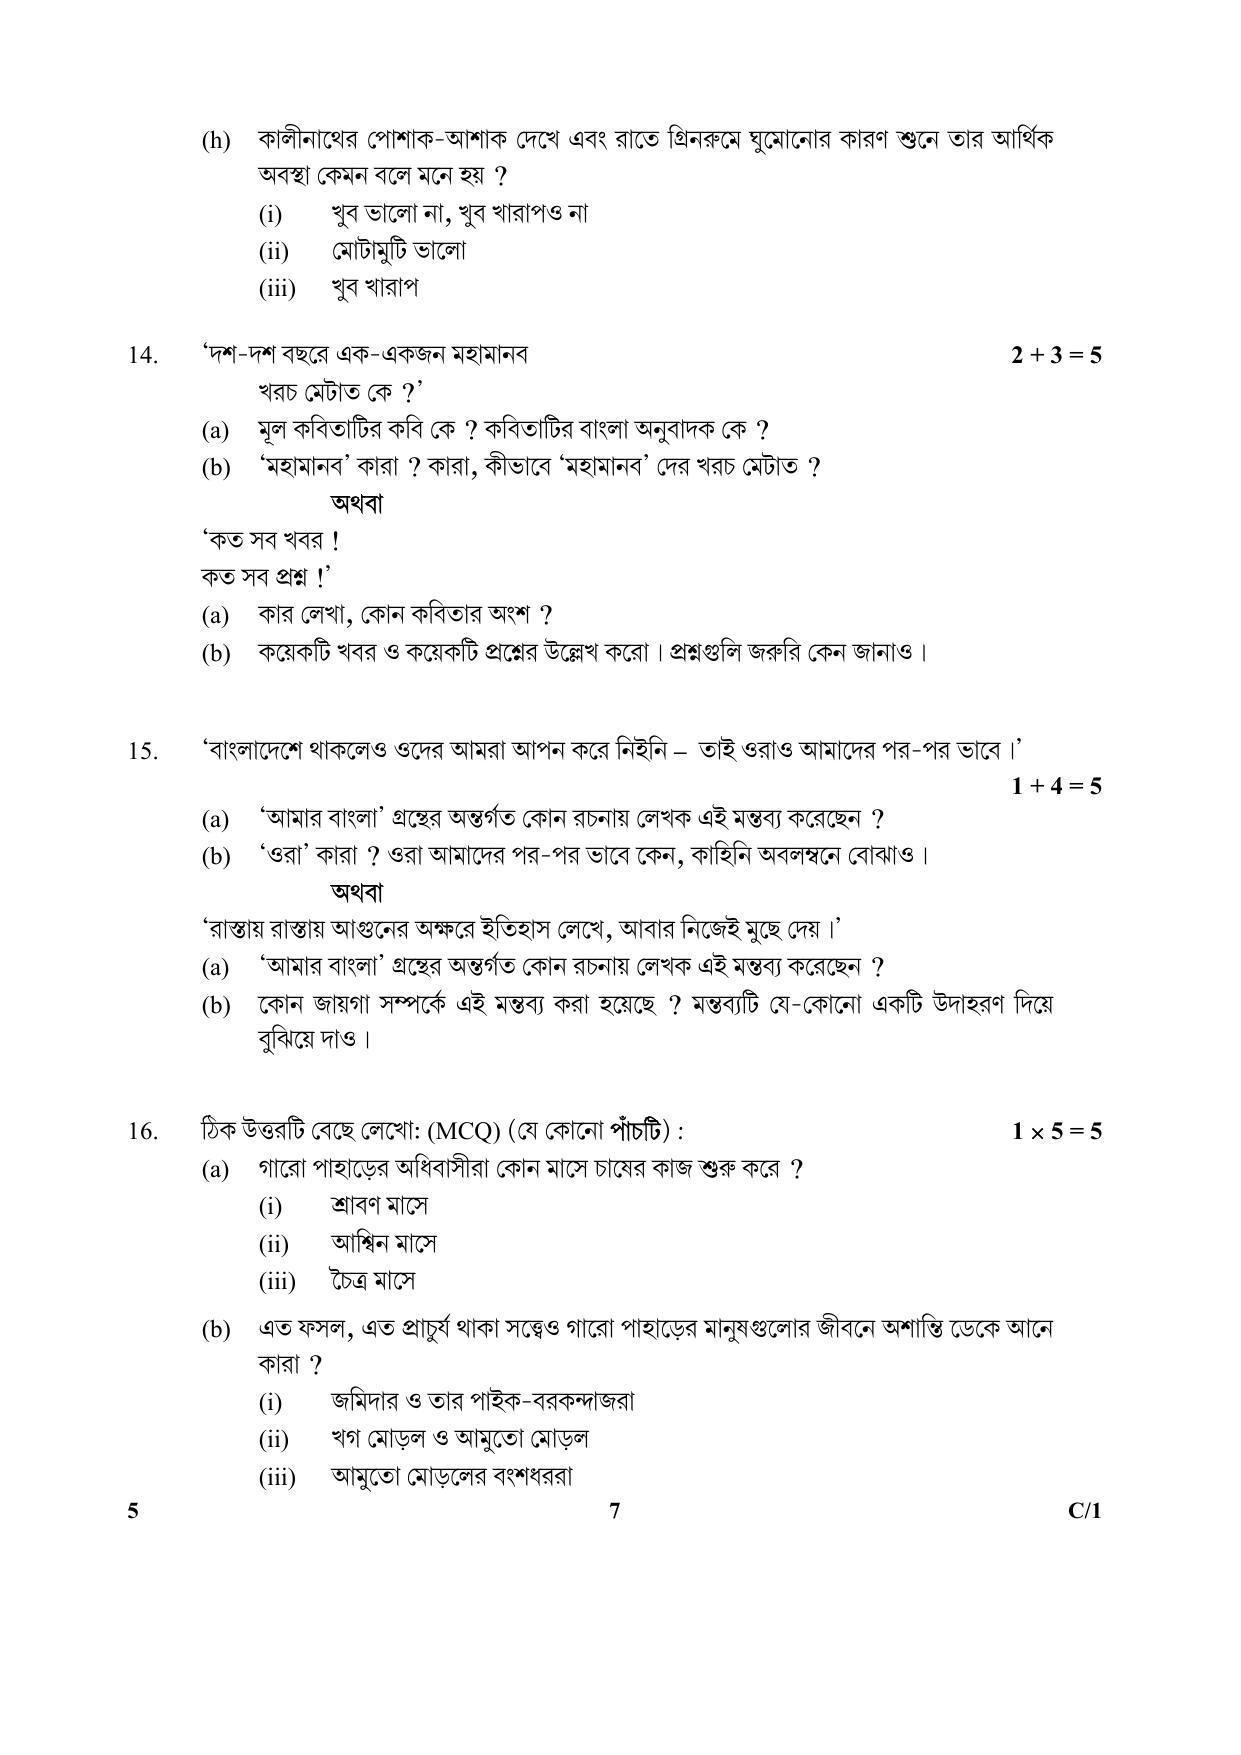 CBSE Class 12 5 (Bengali) 2018 Compartment Question Paper - Page 7